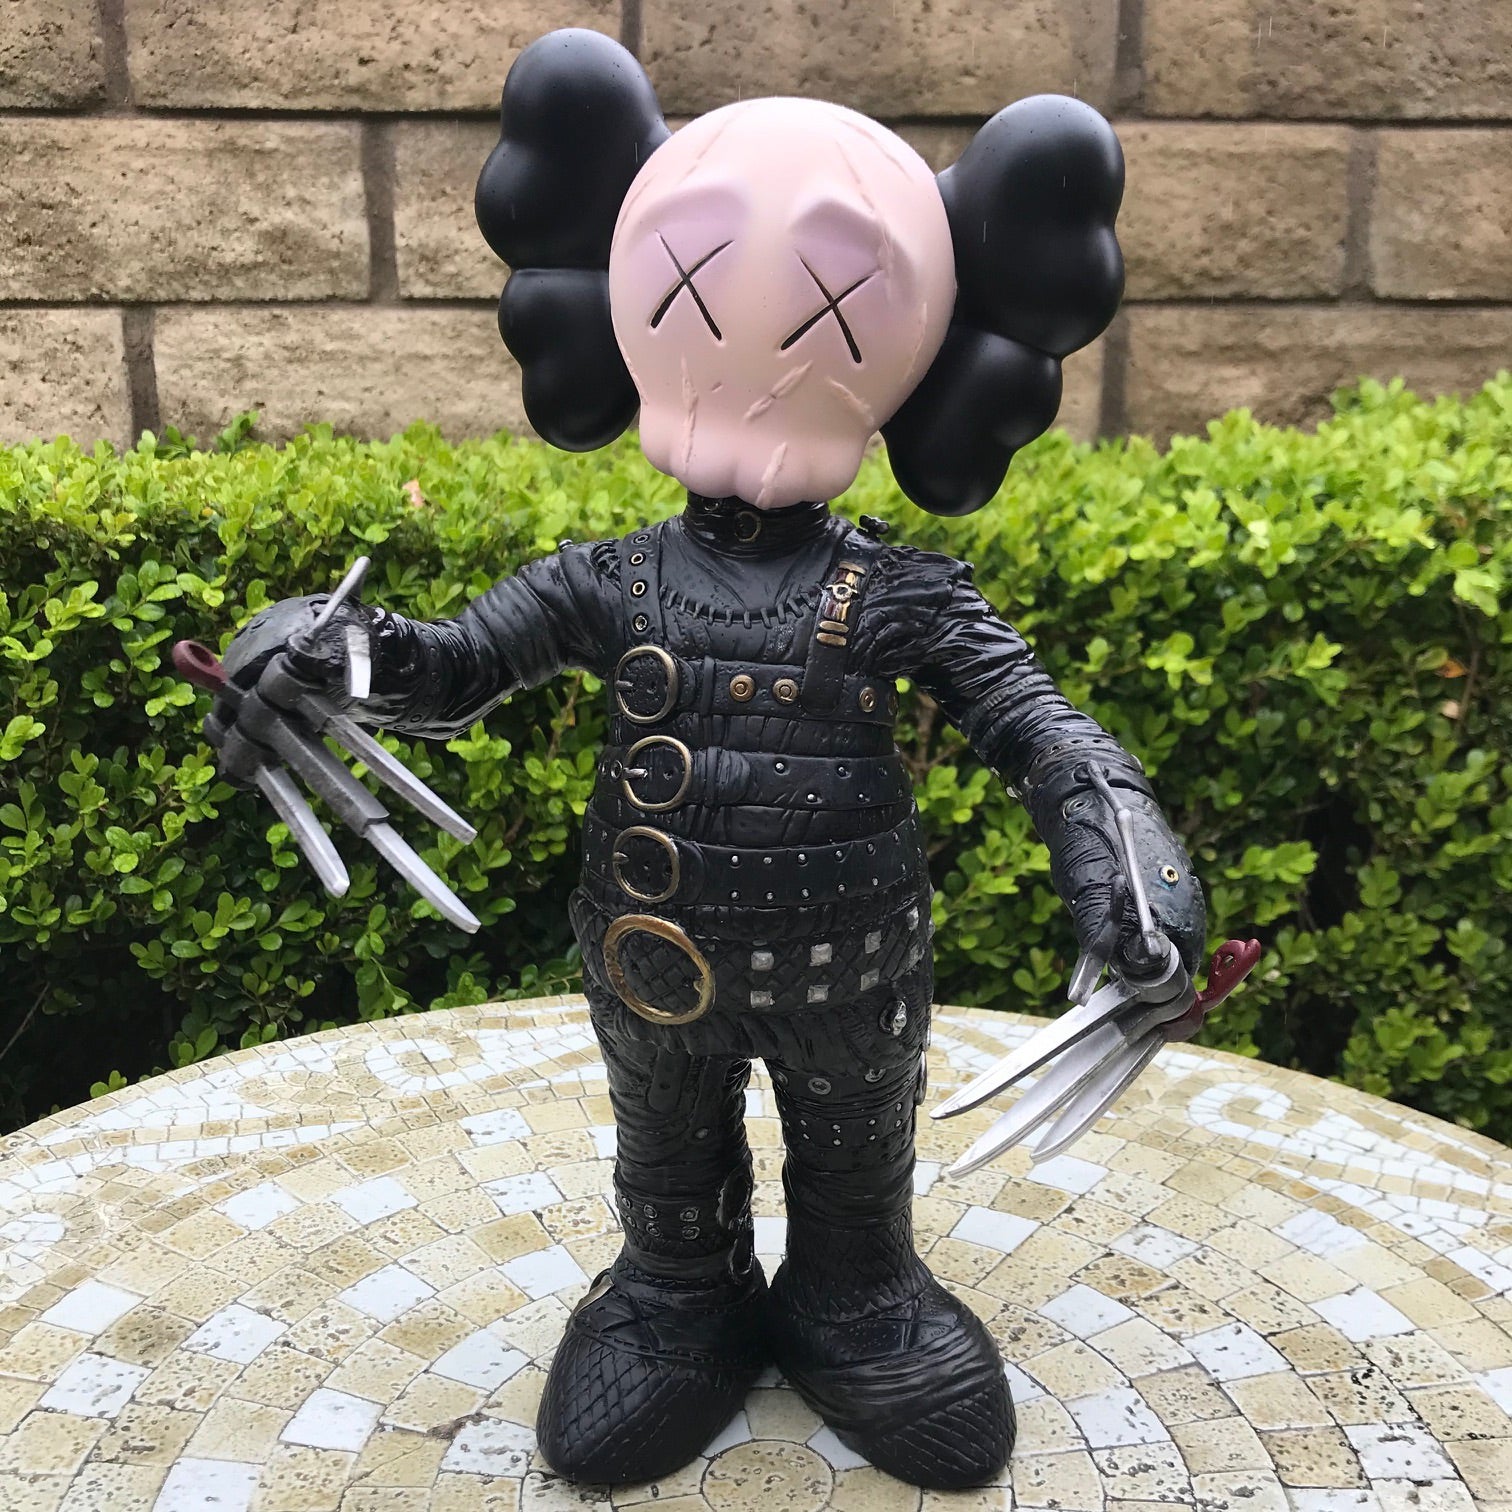 A custom toy figure with a face mask and claws on a Kaws Companion platform.